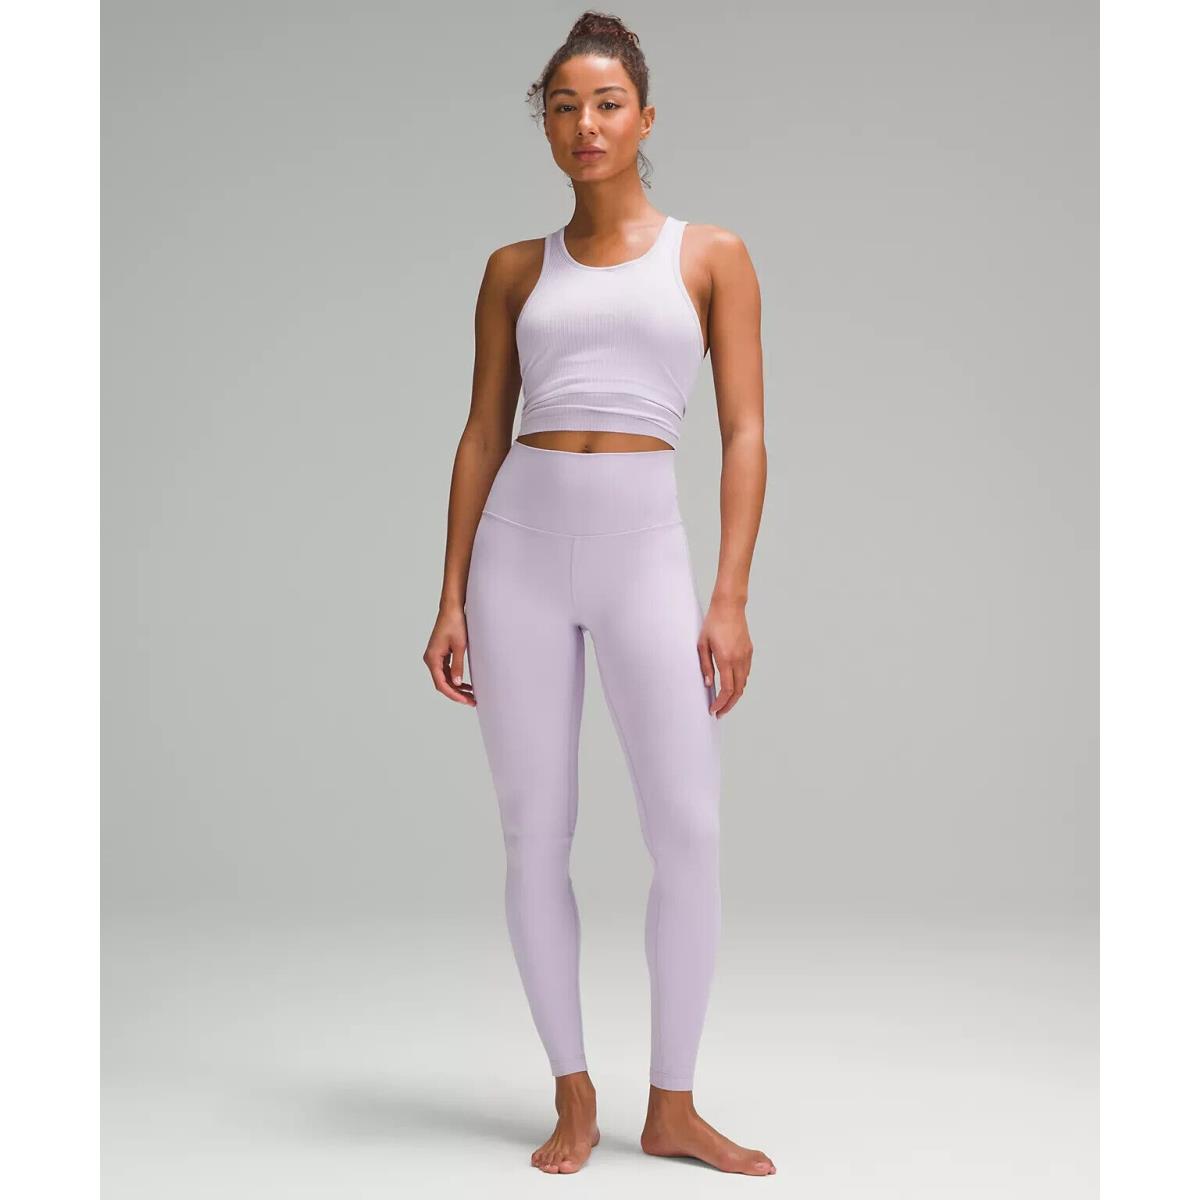 Lululemon Align High-rise Pant 28 Lined Lilac Ether. Size 14. LW5ECIS